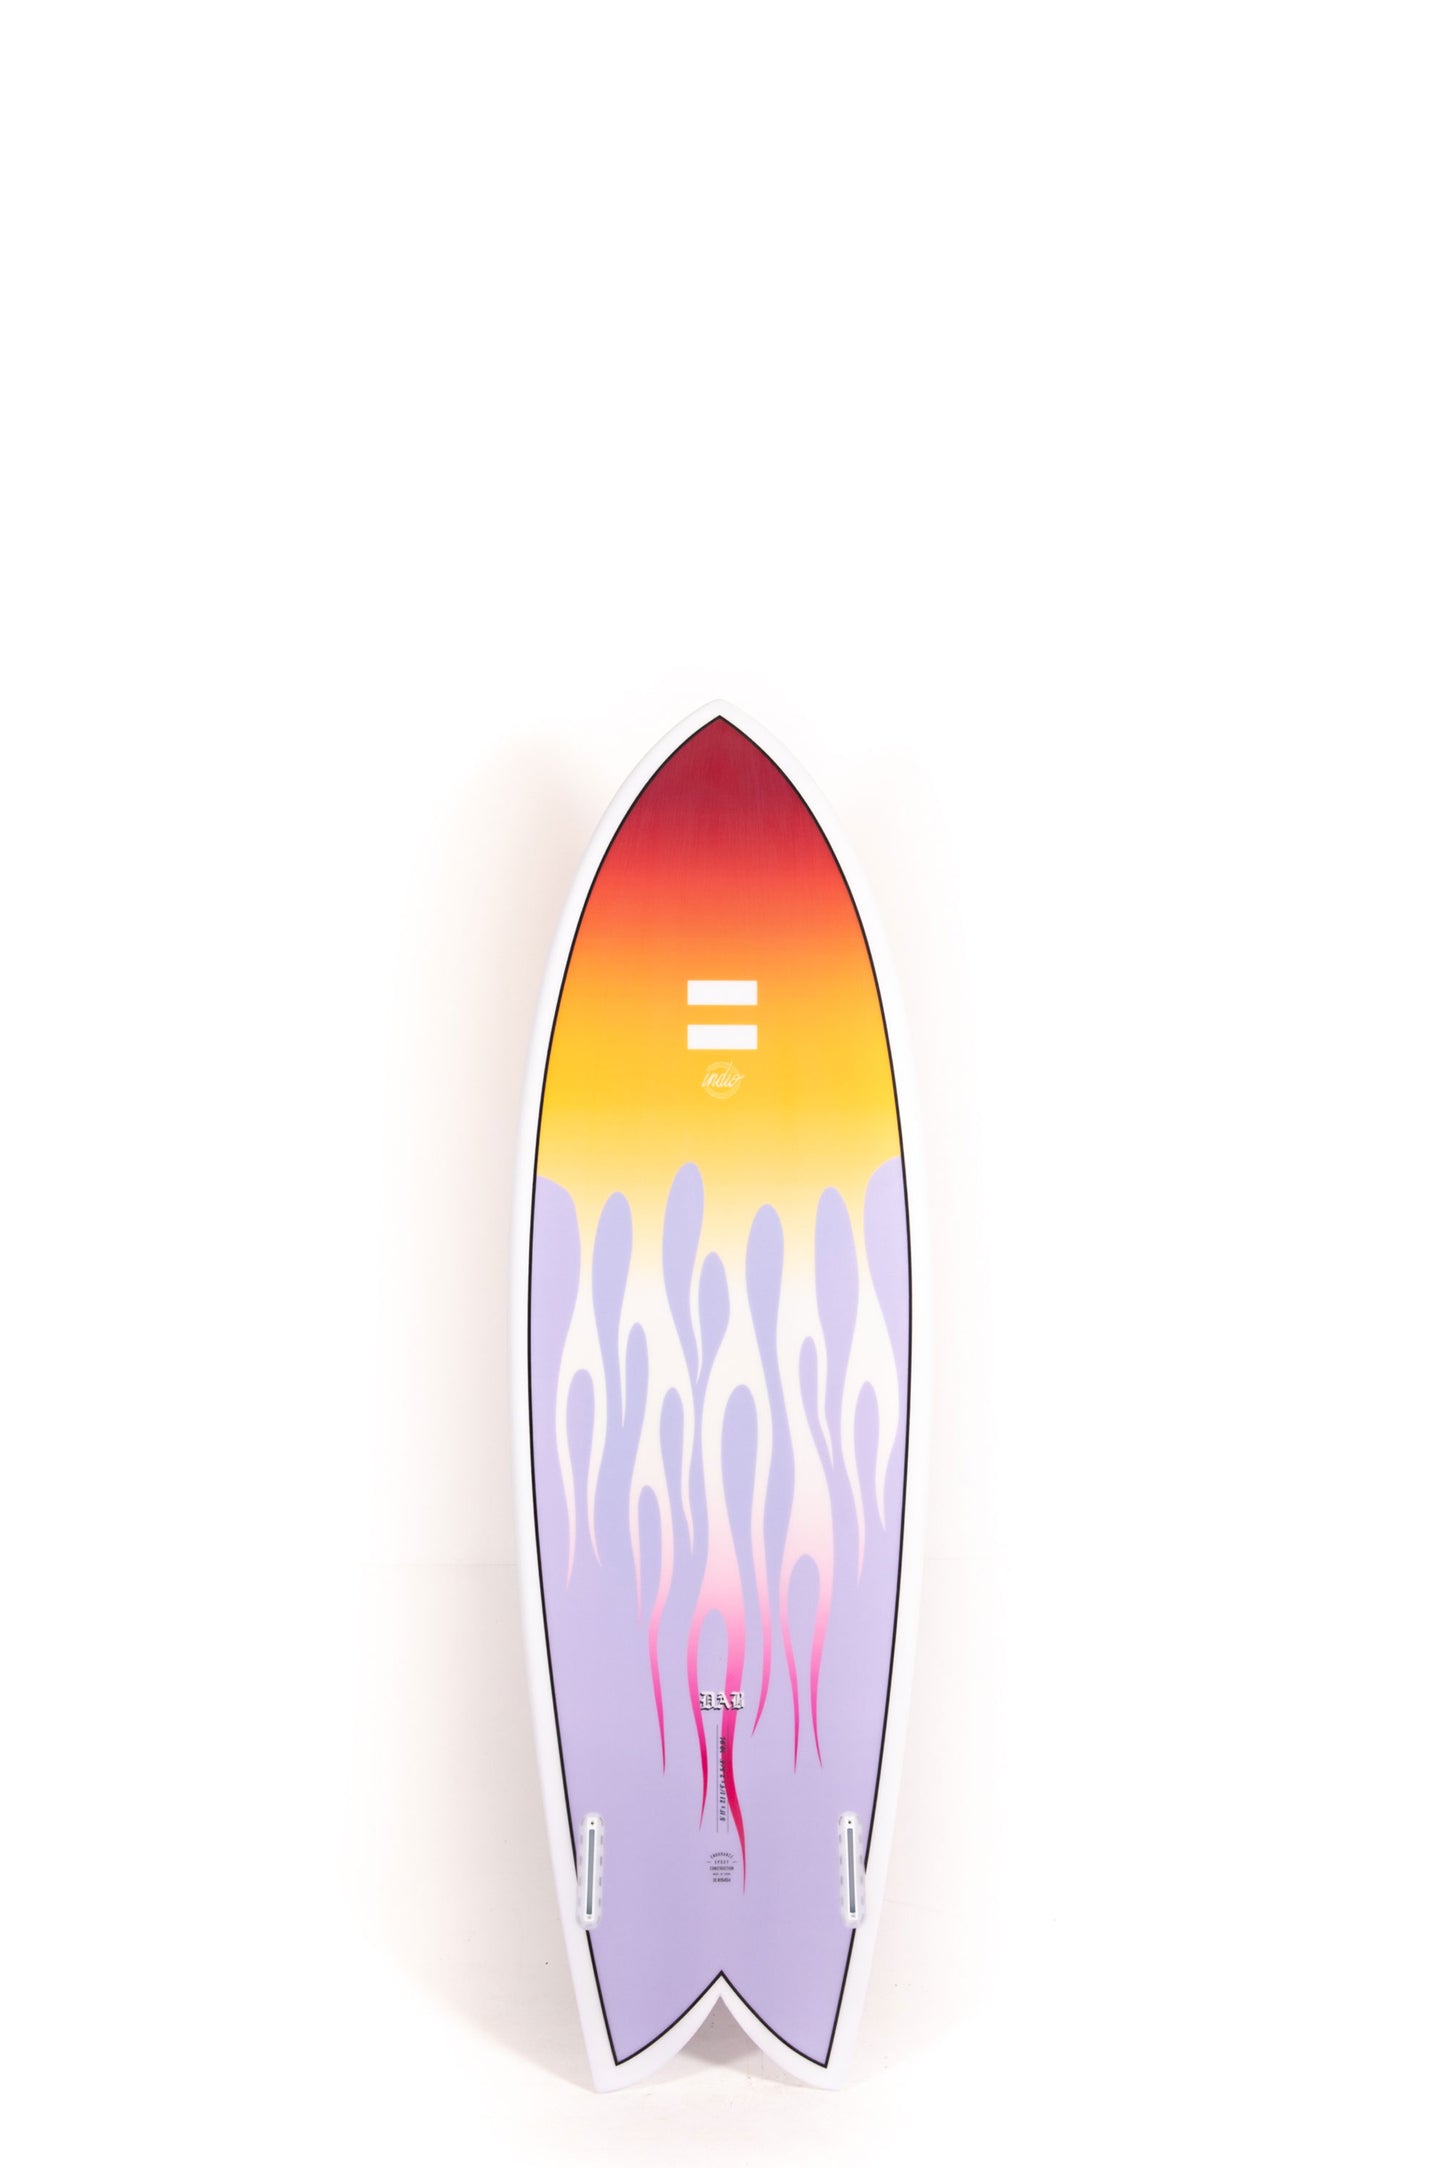 Pukas-Surf-Shop-Indio-Surfboards-Dab-fire-5_11